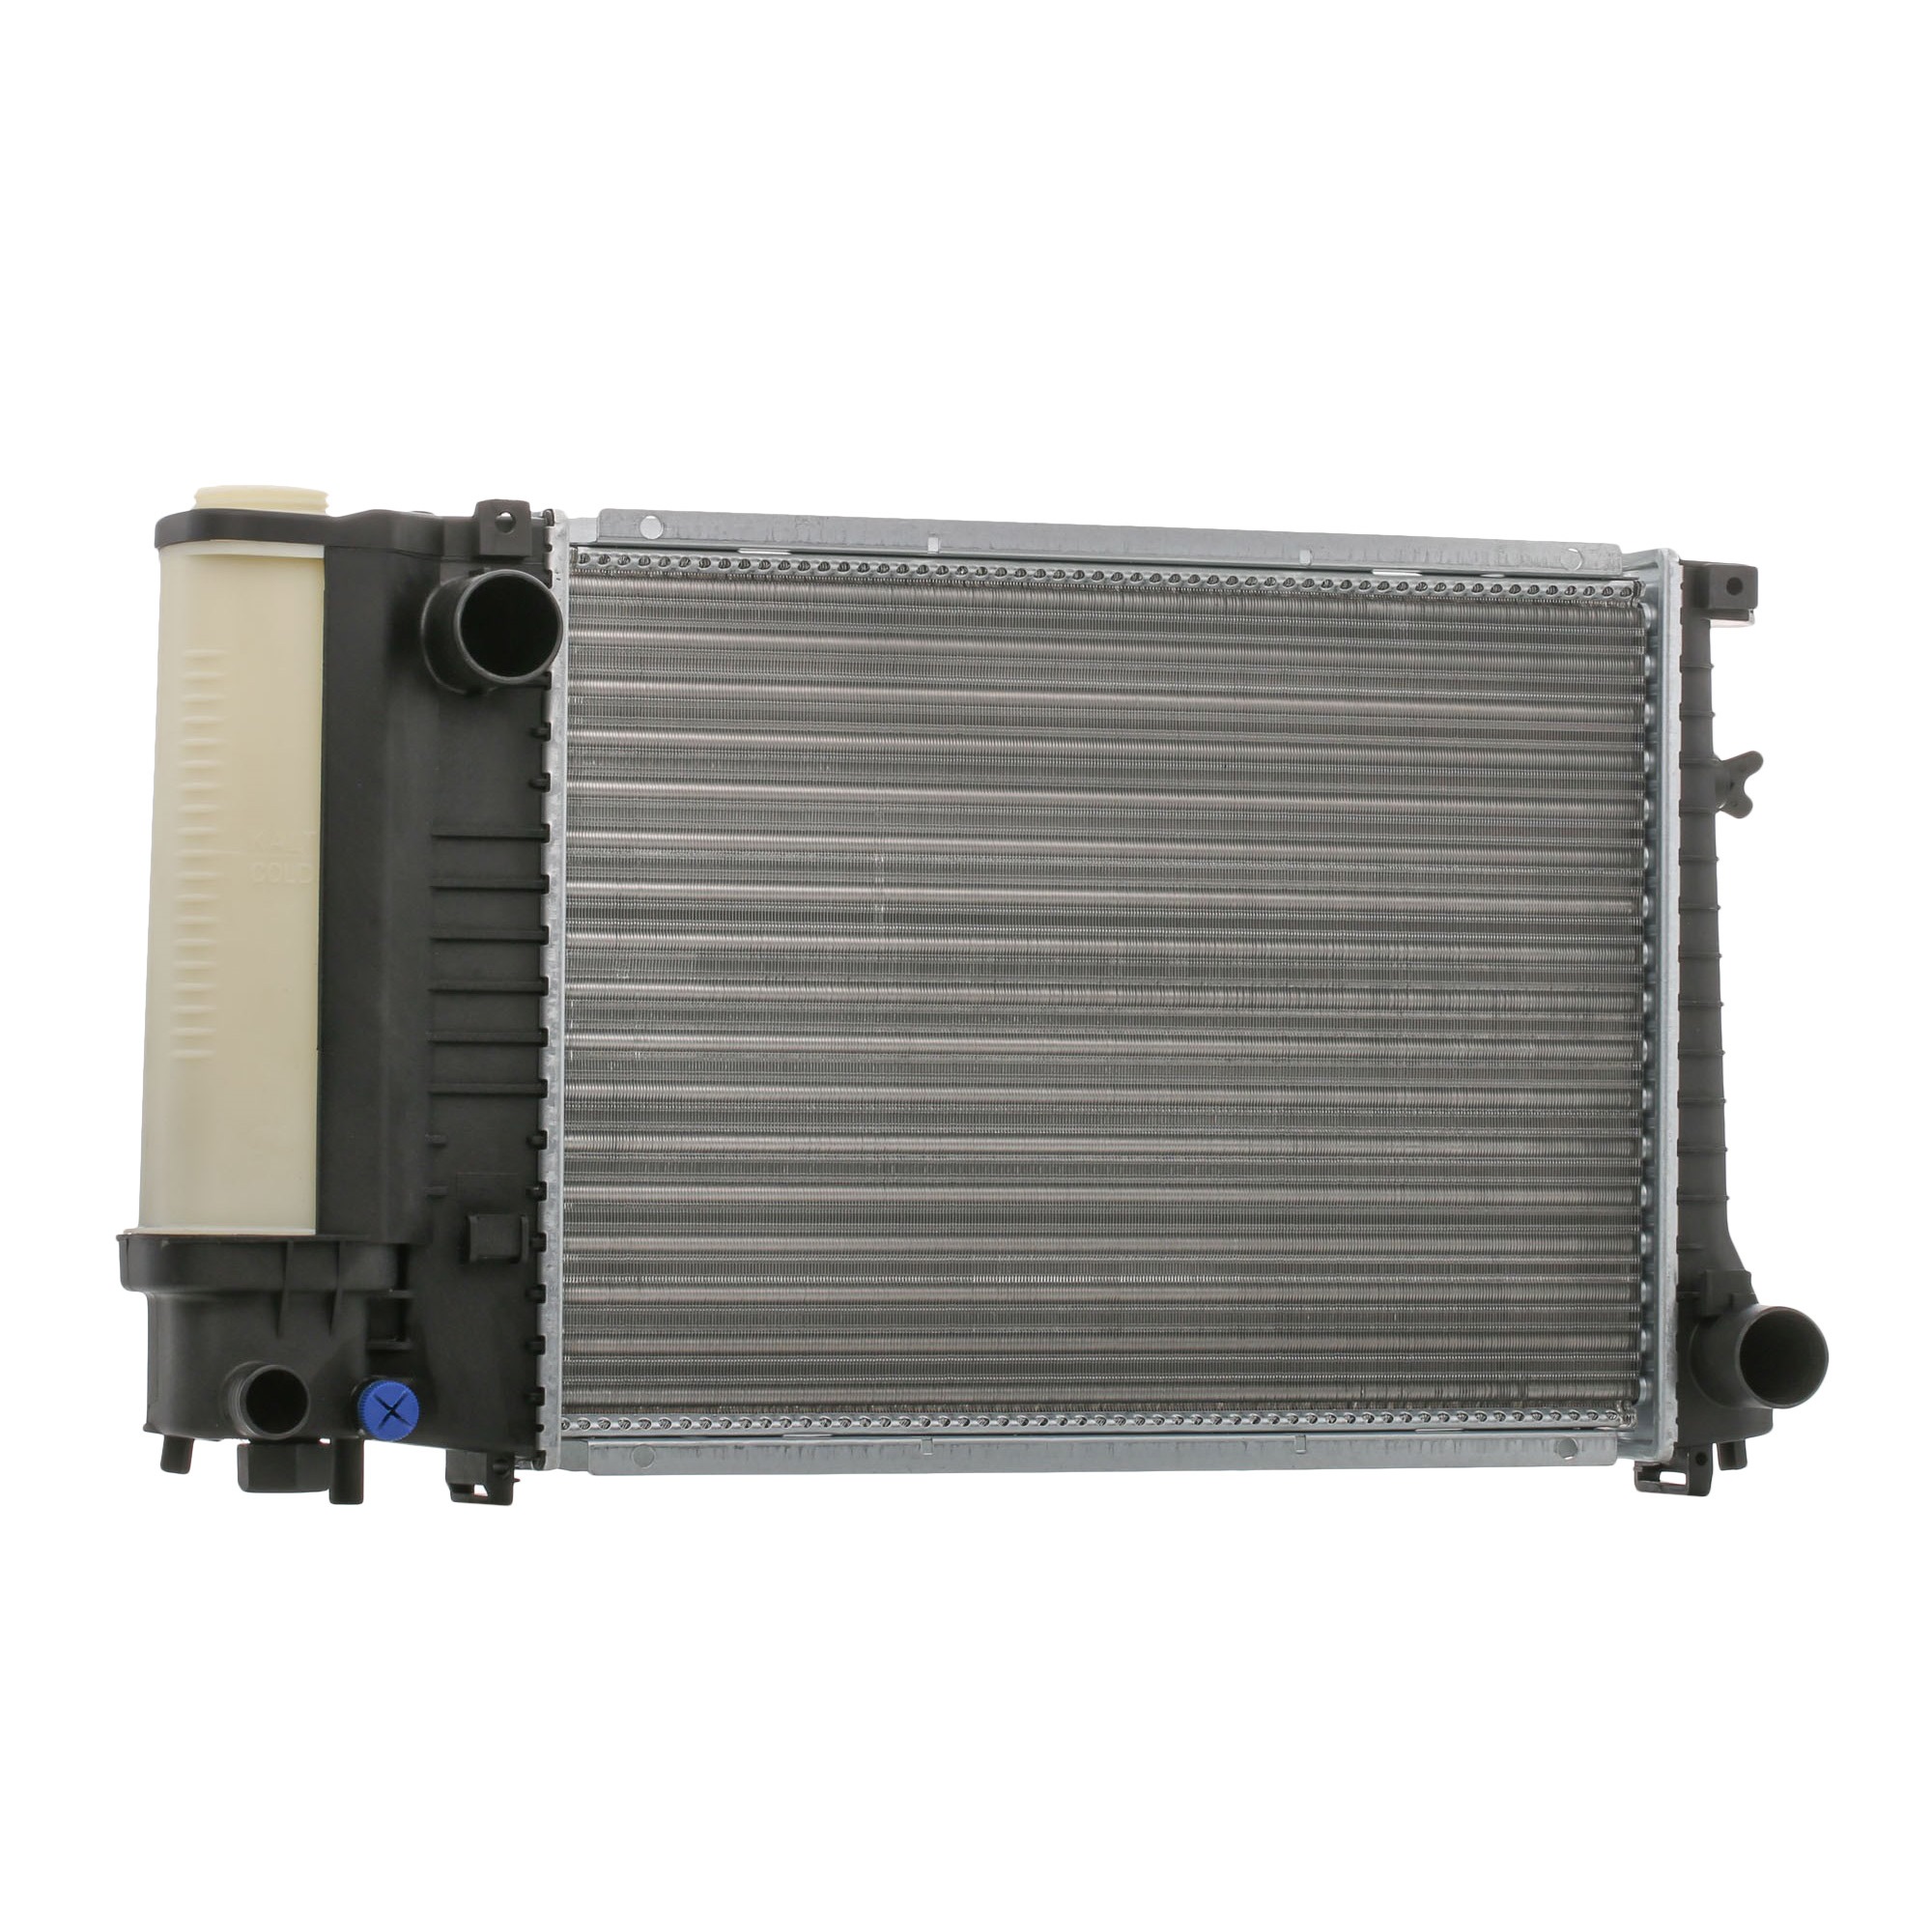 STARK SKRD-0121560 Engine radiator for vehicles without air conditioning, 440 x 329 x 42 mm, Manual Transmission, Brazed cooling fins